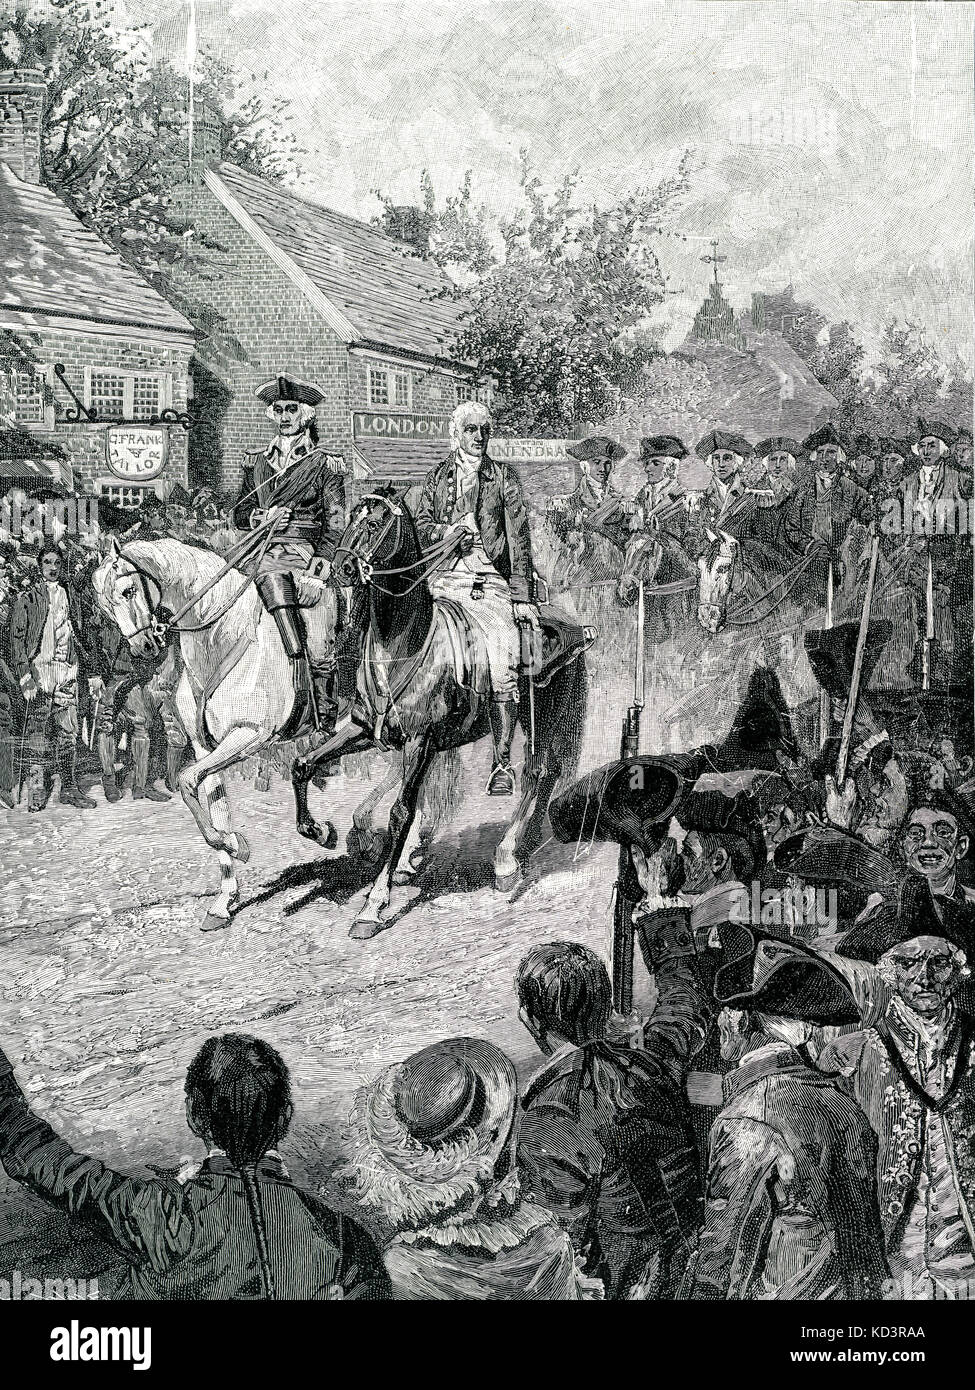 George Washington and George Clinton head the civil procession into New York, 25 November 1783. Washington's forces take posession of New York at the end of the American Revolution. British evacuation of New York. Illustration by Howard Pyle, 1896 Stock Photo